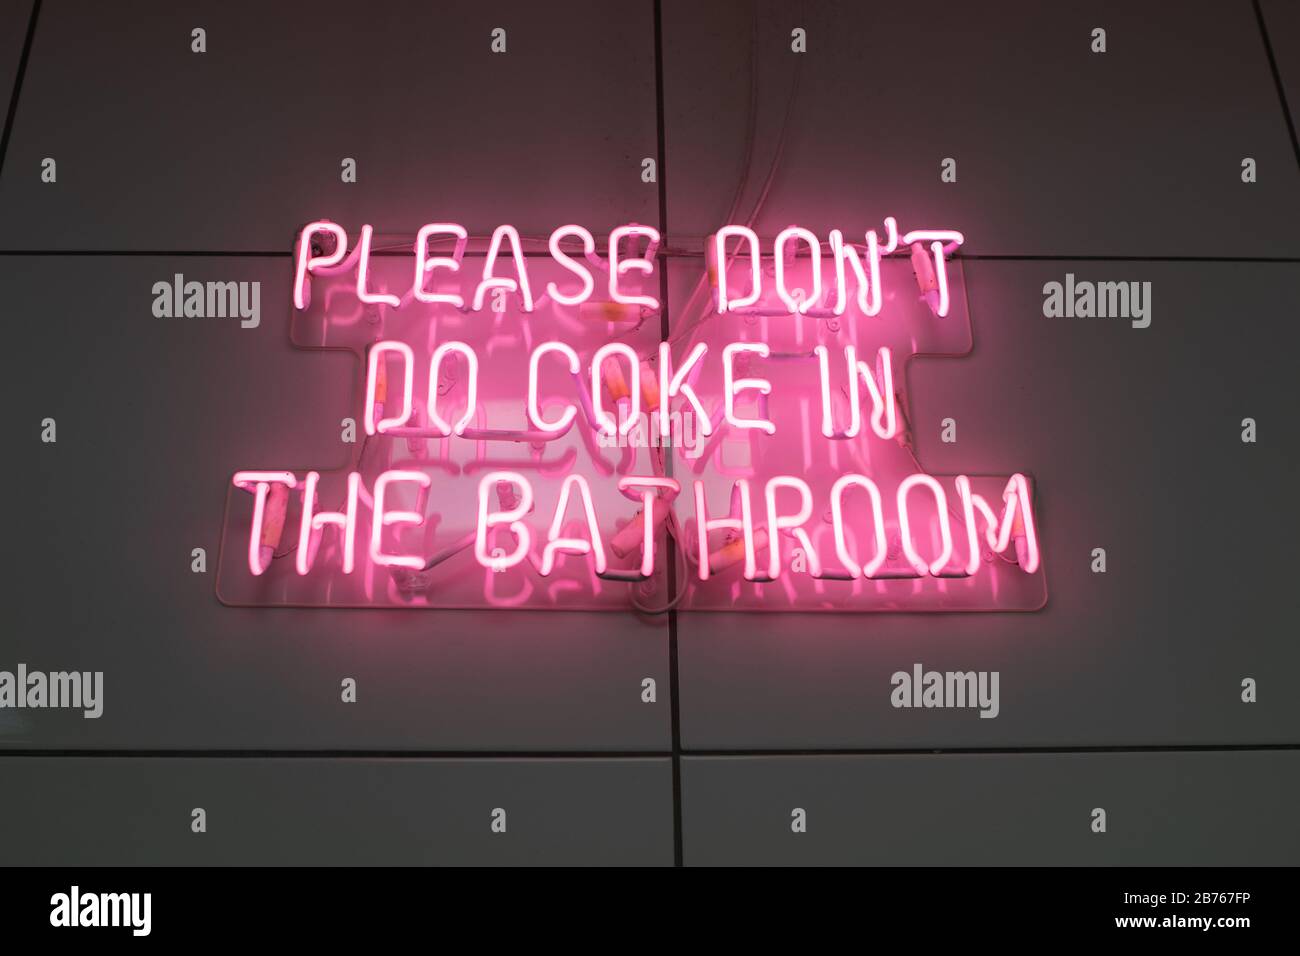 Please don't do coke in the bathroom pink neon sign Stock Photo